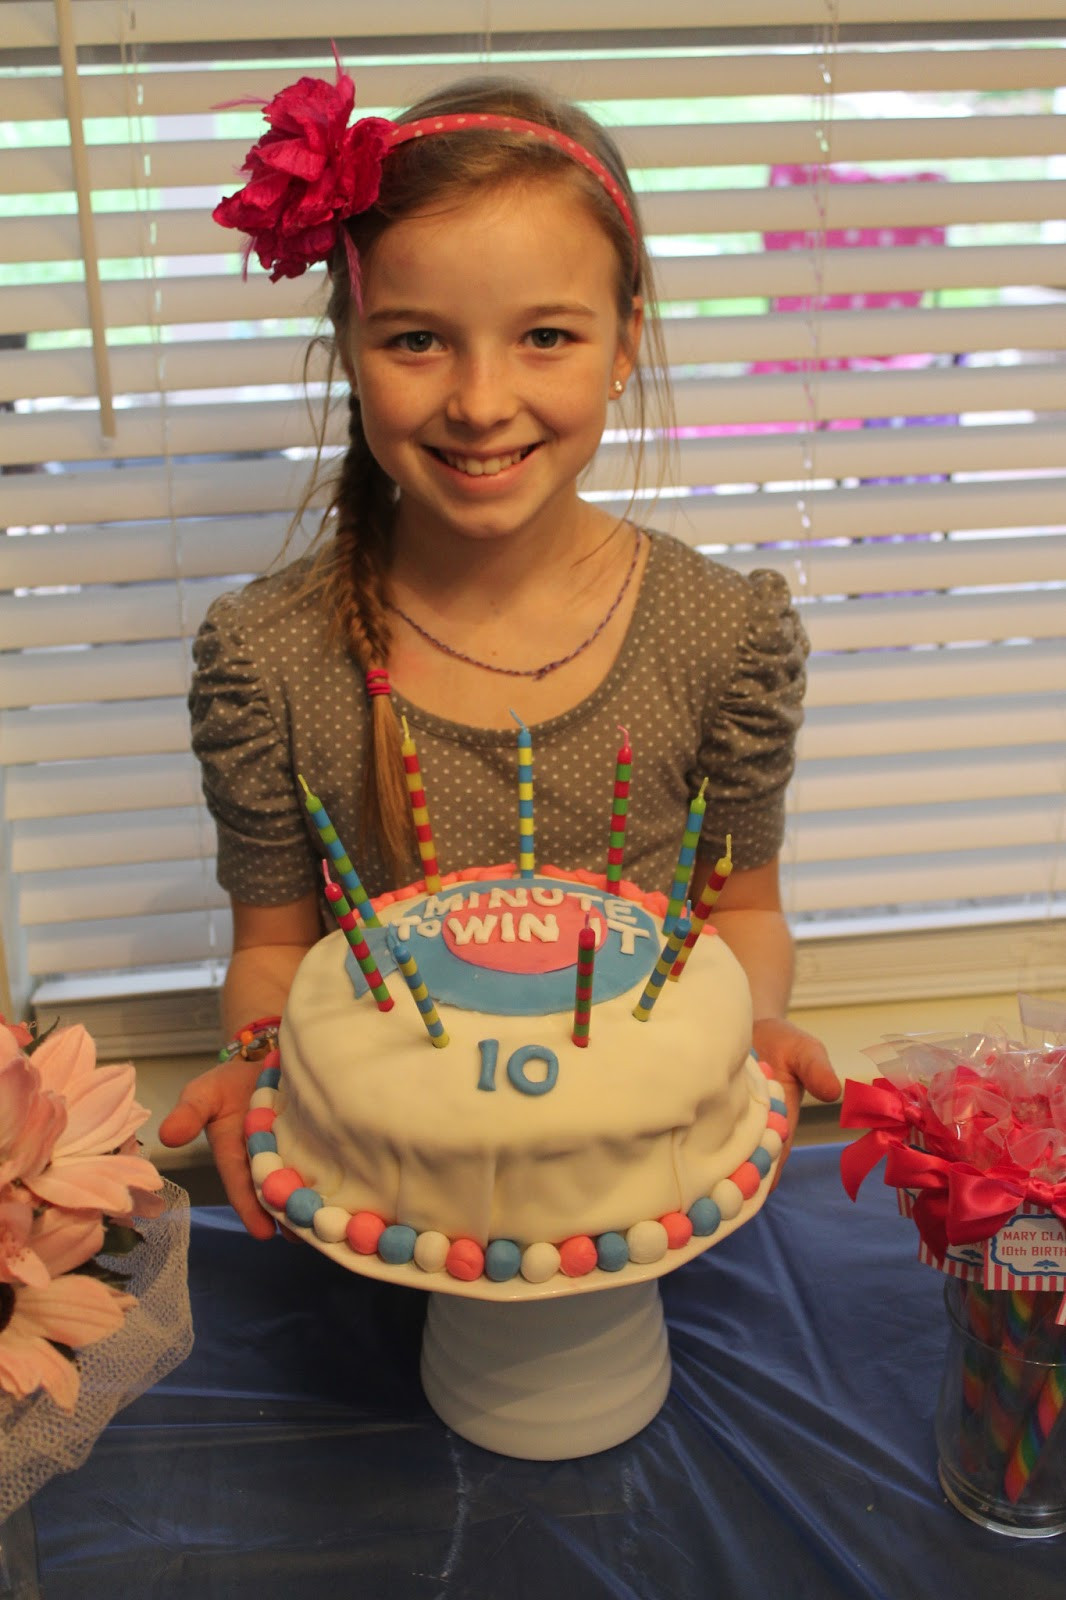 Birthday Party Ideas For 10 Year Old Girls
 Blair s Blessings 10 Year Old Minute to Win It Birthday Party